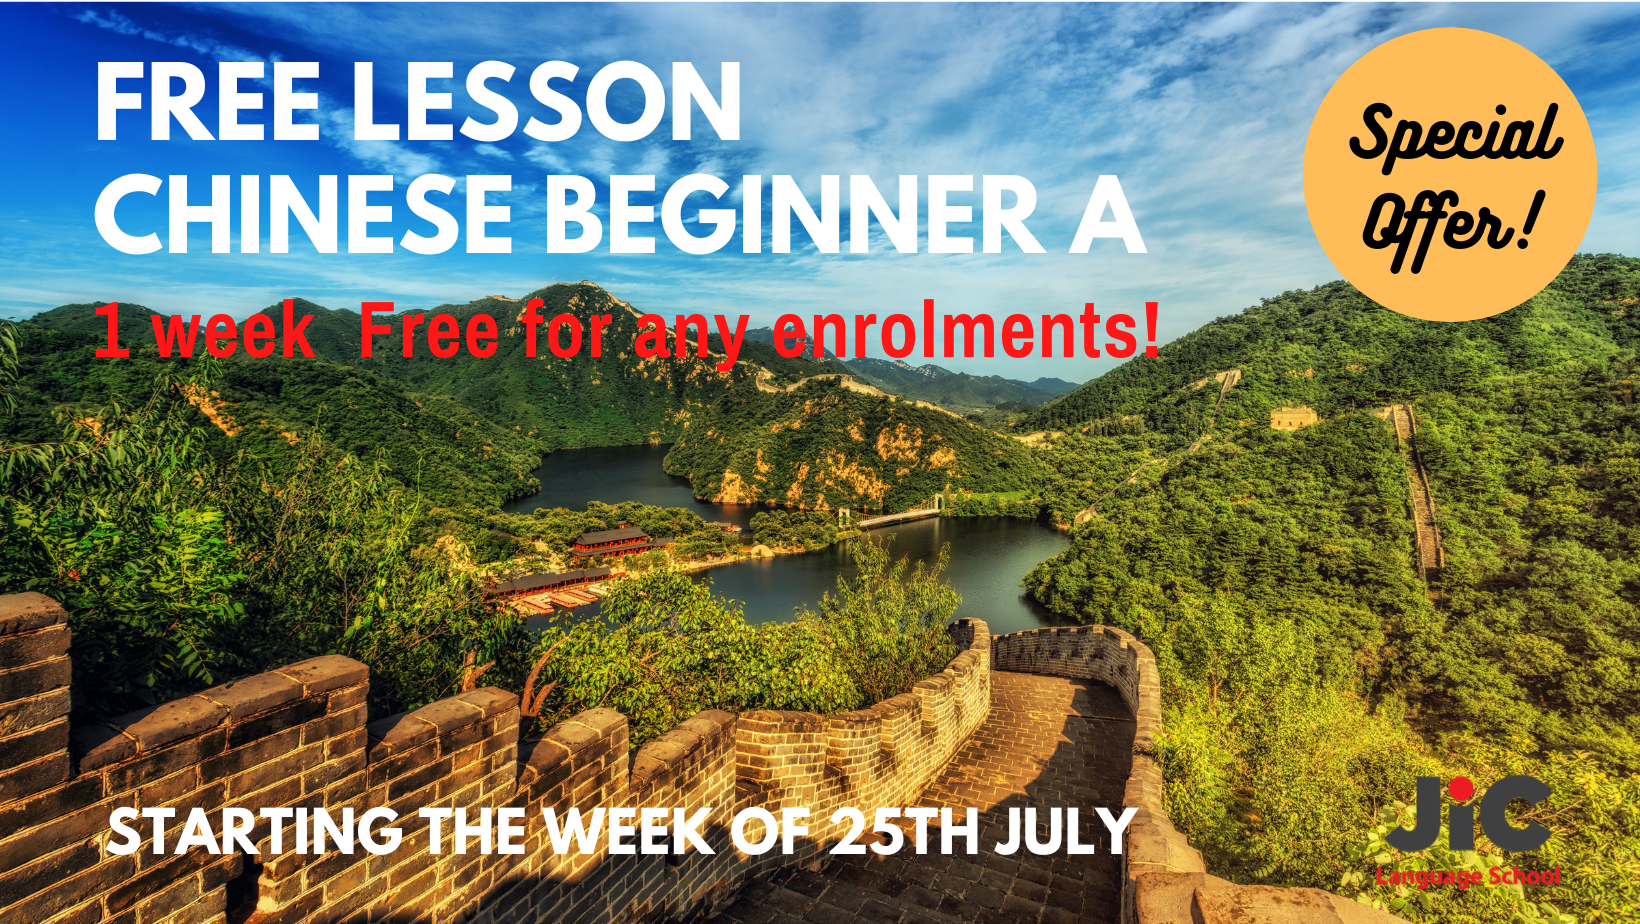 Free Chinese Beginner Lesson